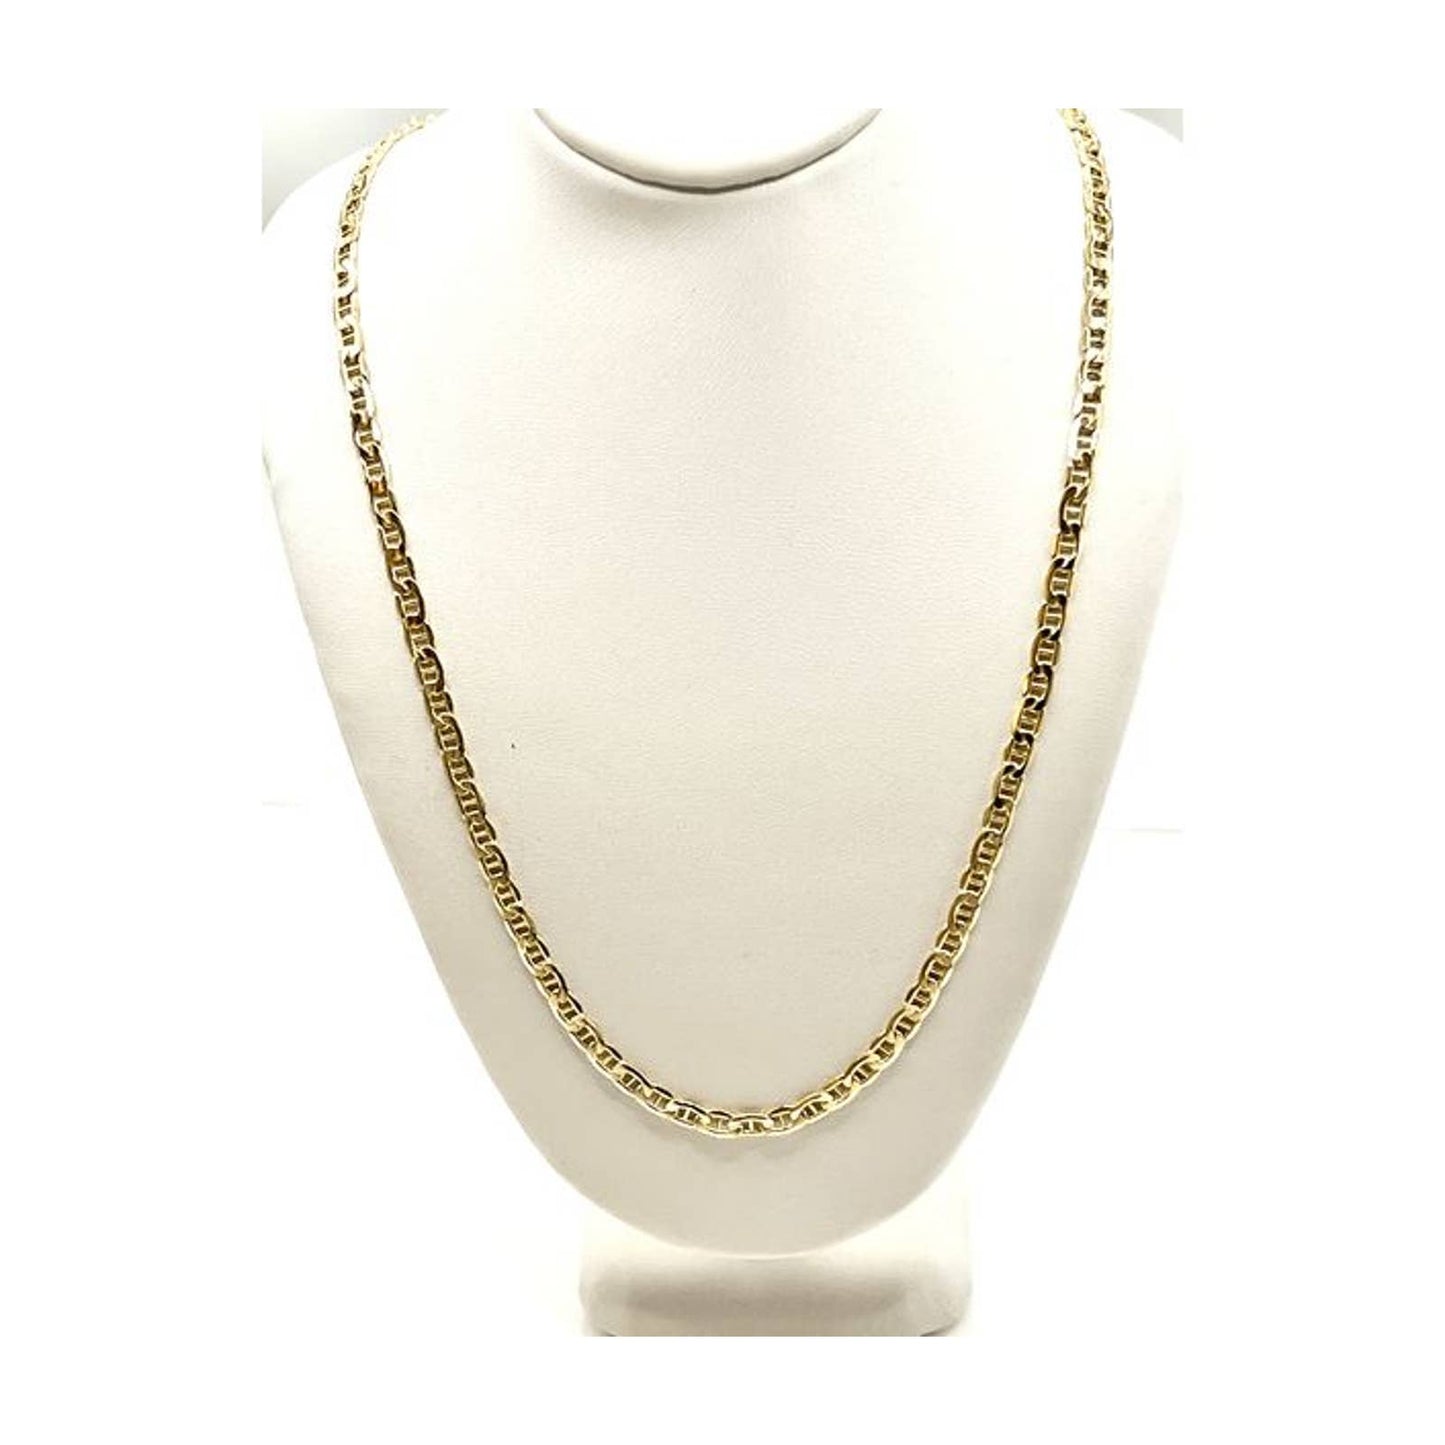 10k Gold Anchor Link Chain- 22 inches long- 4mm wide